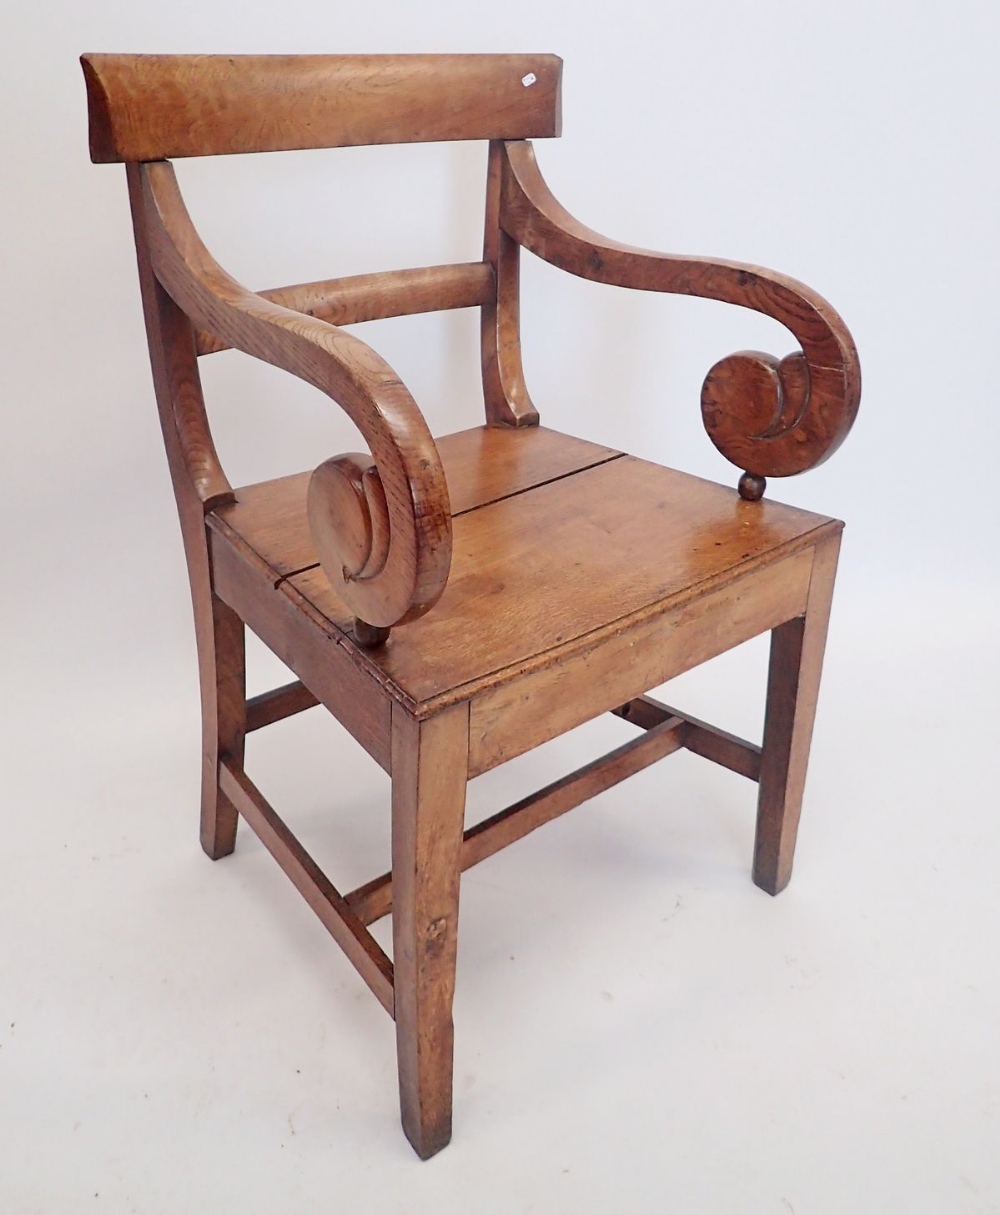 A Regency oak carver chair with scroll over arms